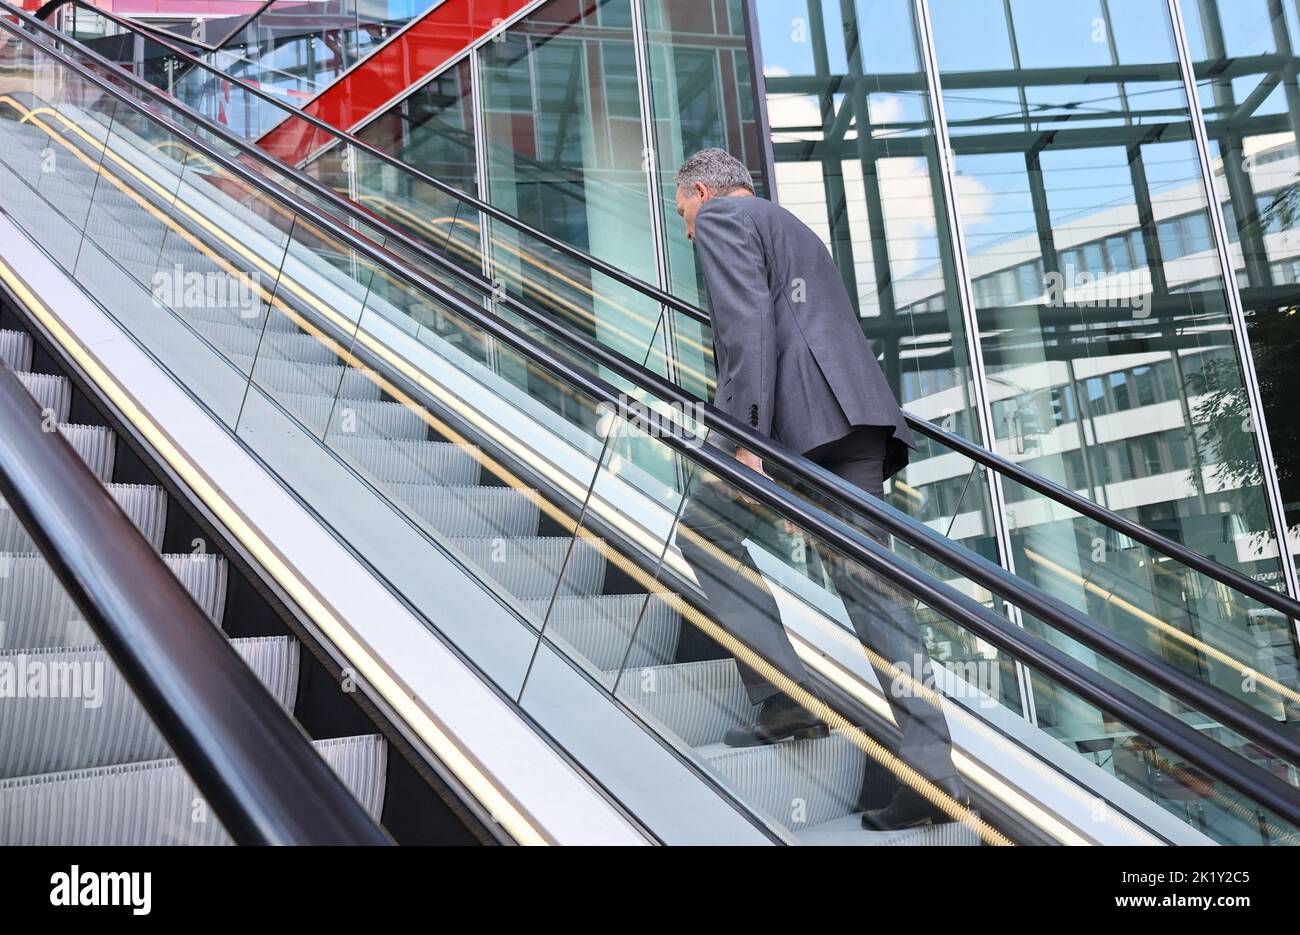 Klaus-Dieter Maubach, CEO of German utility Uniper, climbs an escalator after giving a media statement, as Germany has agreed to nationalize Uniper by buying Fortum's stake in the gas importer to secure operations and keep its business going, in Duesseldorf, Germany, September 21, 2022. REUTERS/Wolfgang Rattay Stock Photo